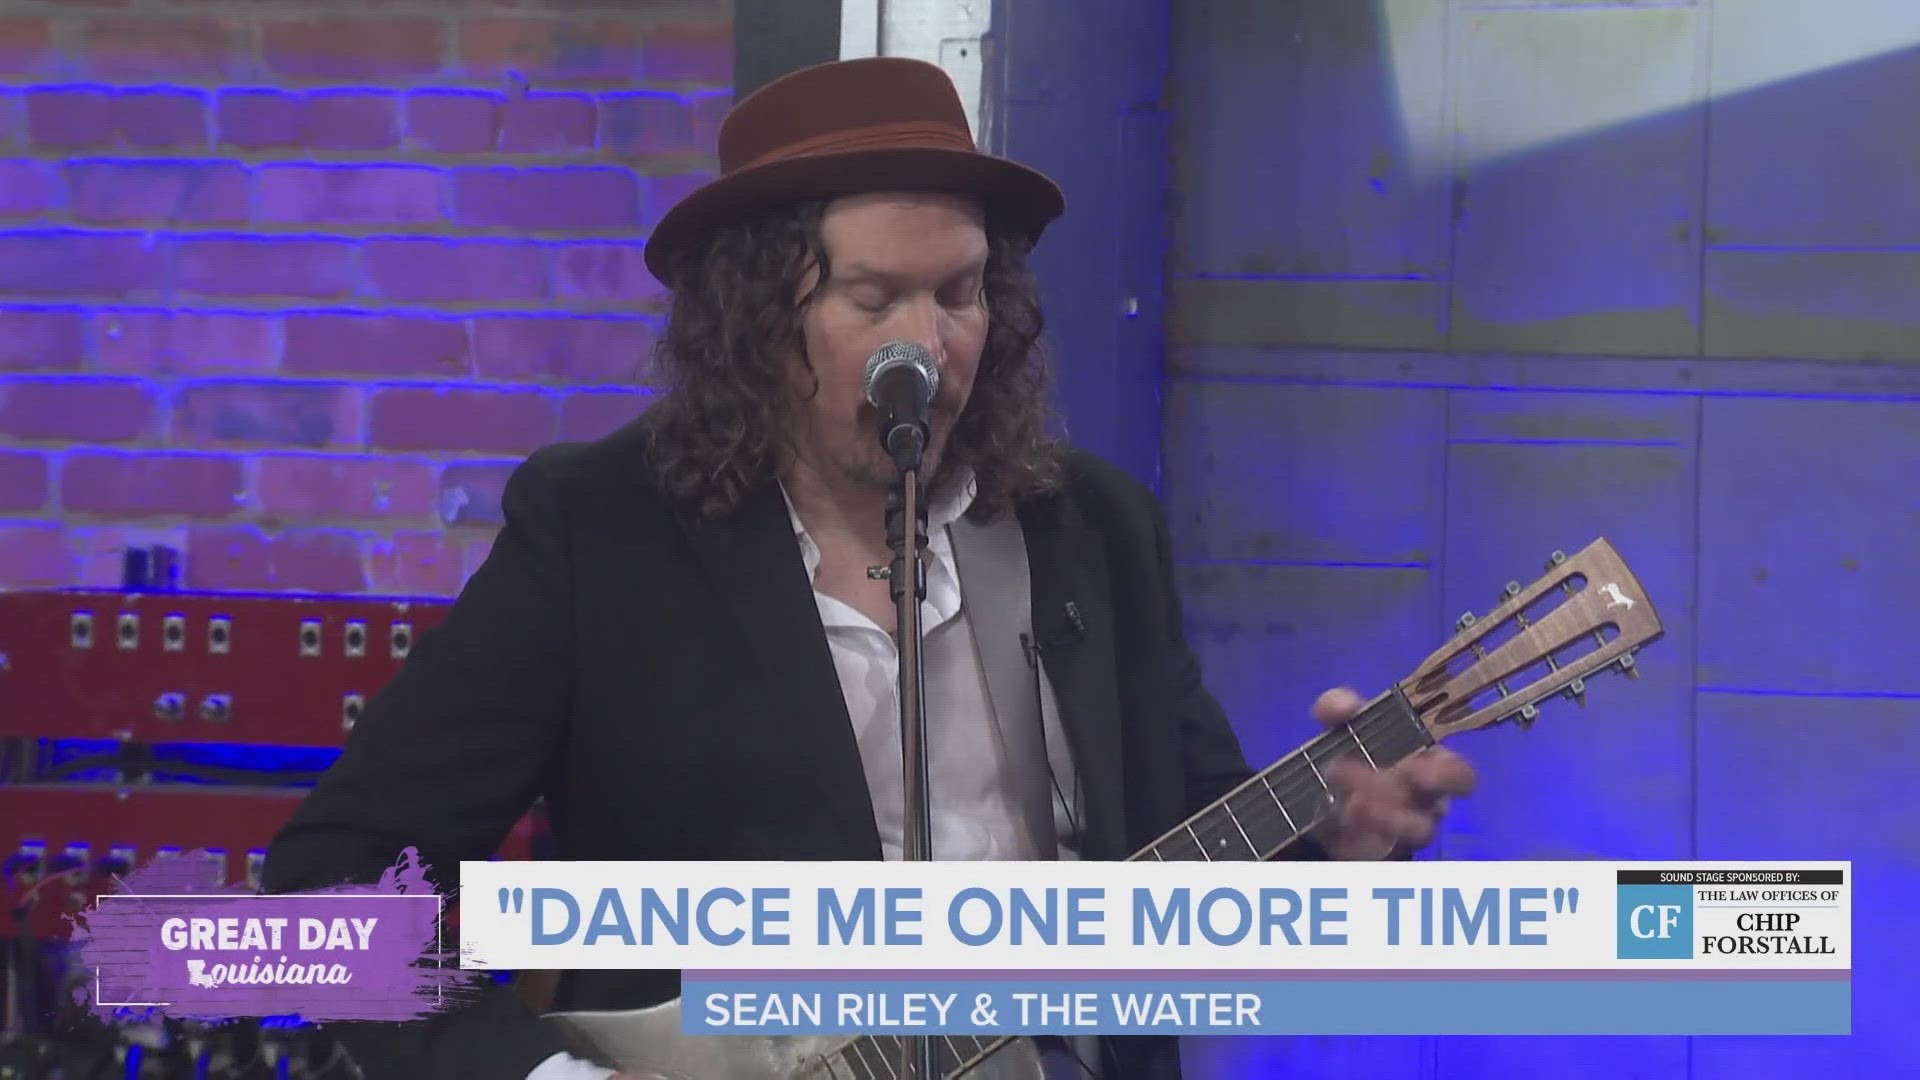 Sean Riley & The Water perform another song from their latest LP.